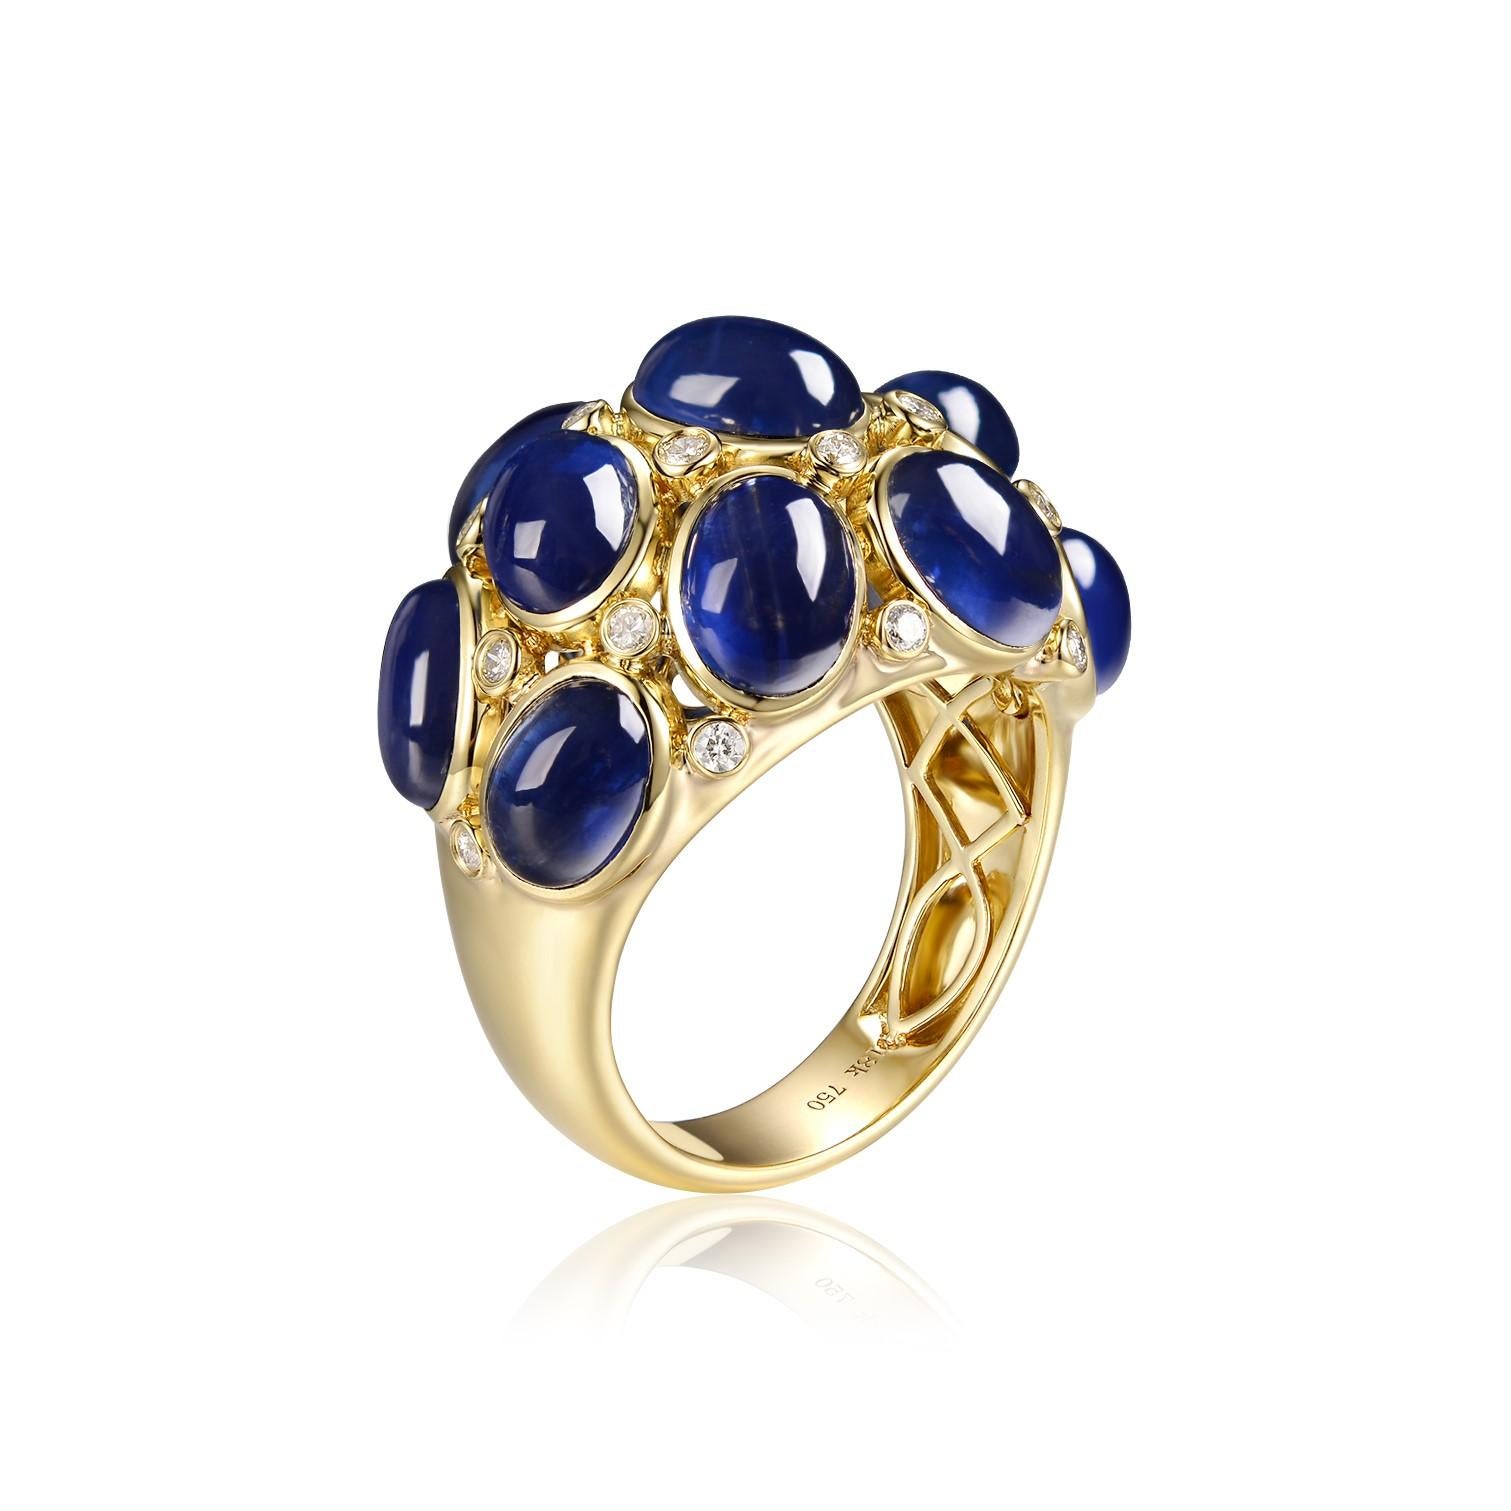 This ring is an elegant and classic piece, sure to make a lasting impression.

It features an 18 karat yellow gold dome that holds 11 blue sapphires in a cluster setting. The total weight of the blue sapphires is 15.22 carats, and each gem measures